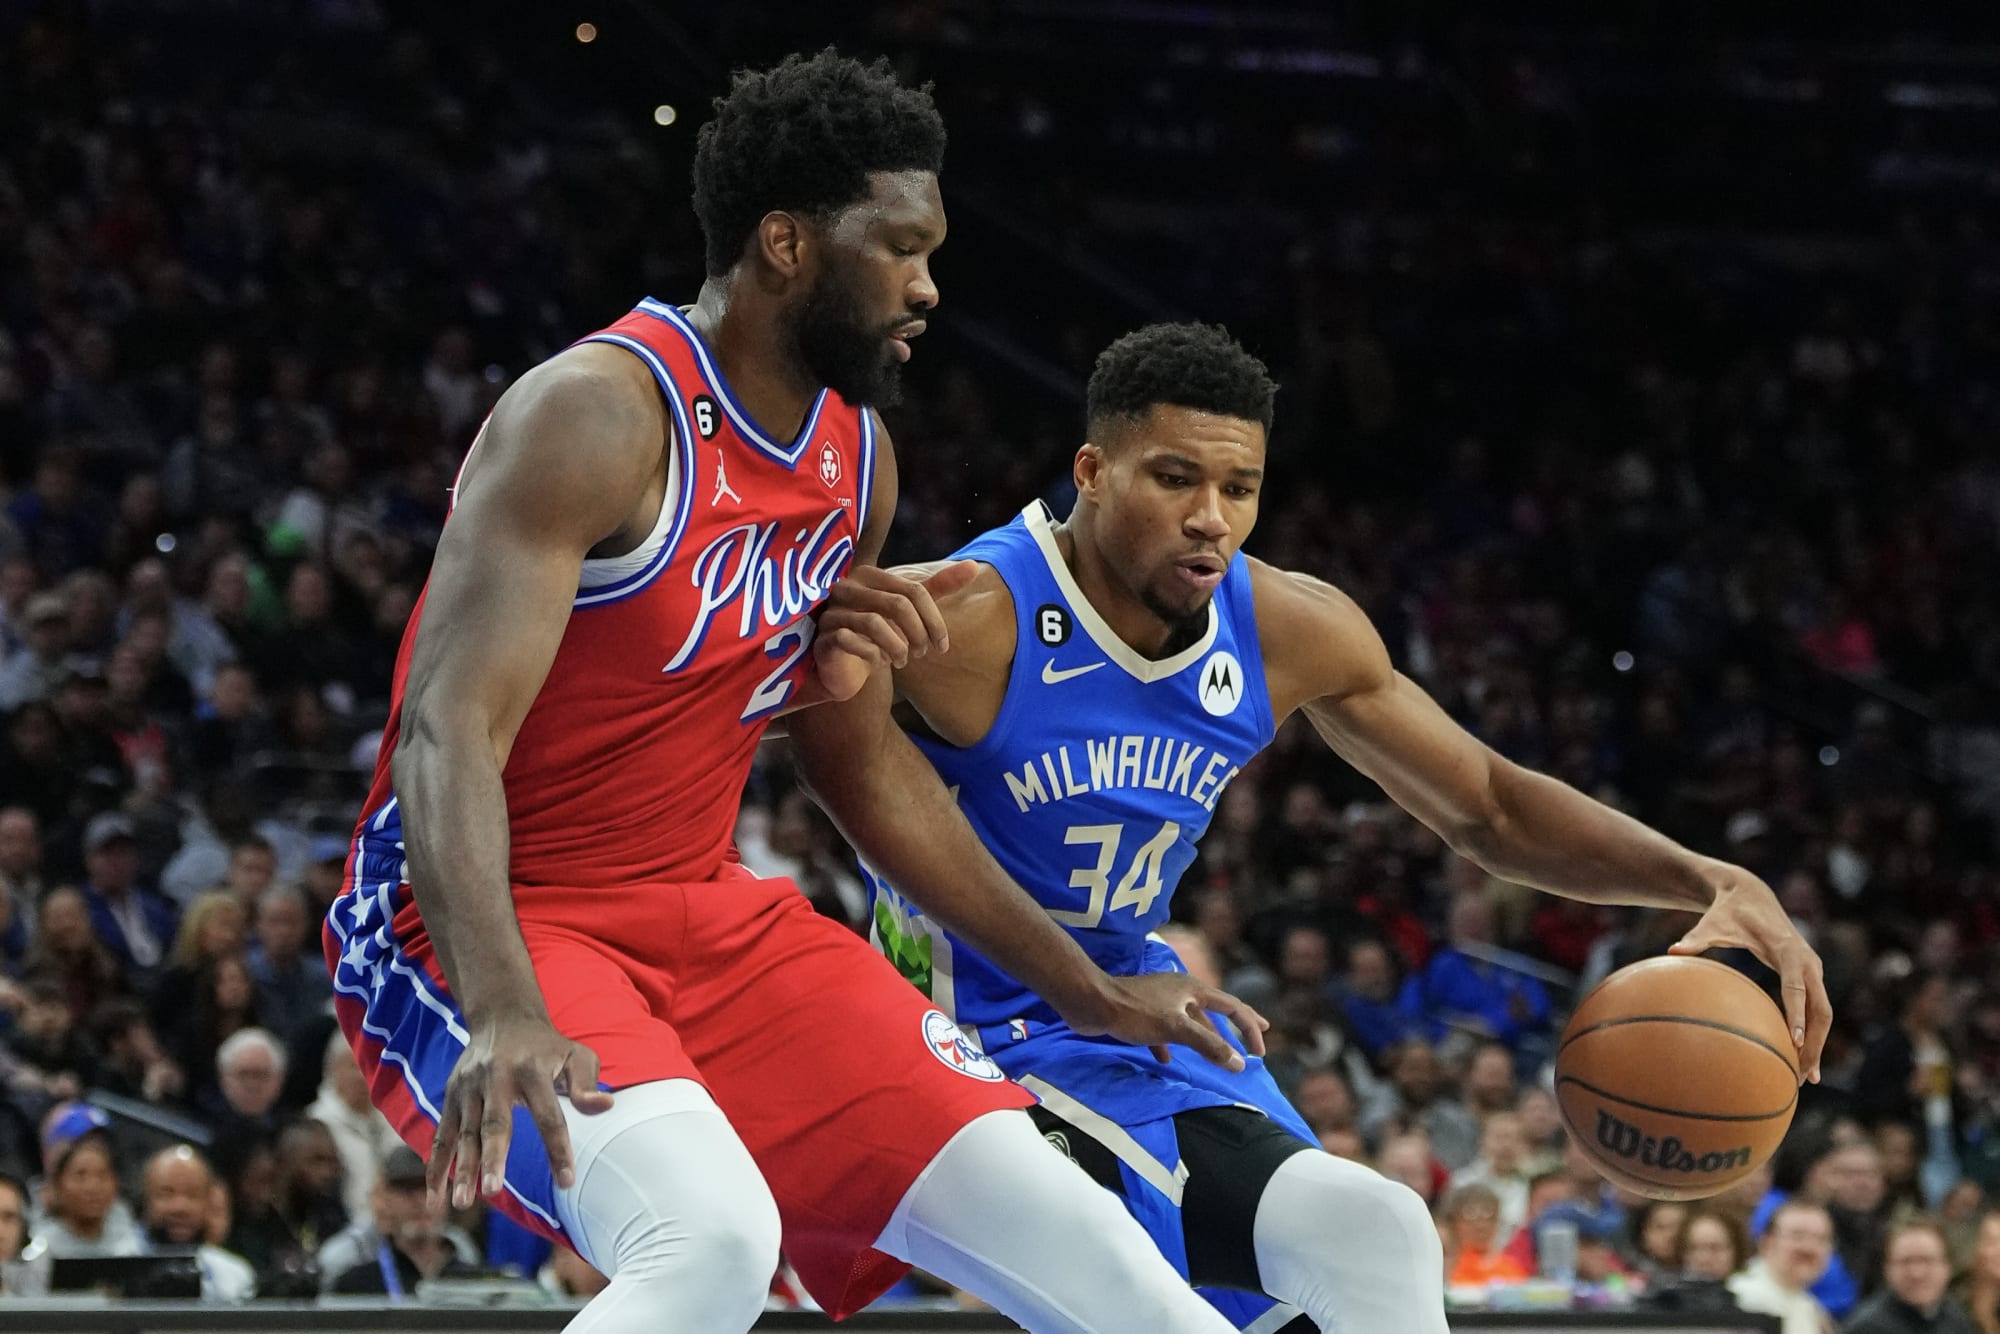 Twitter roasts Joel Embiid for 'dirty' foul on Giannis Antetokounmpo